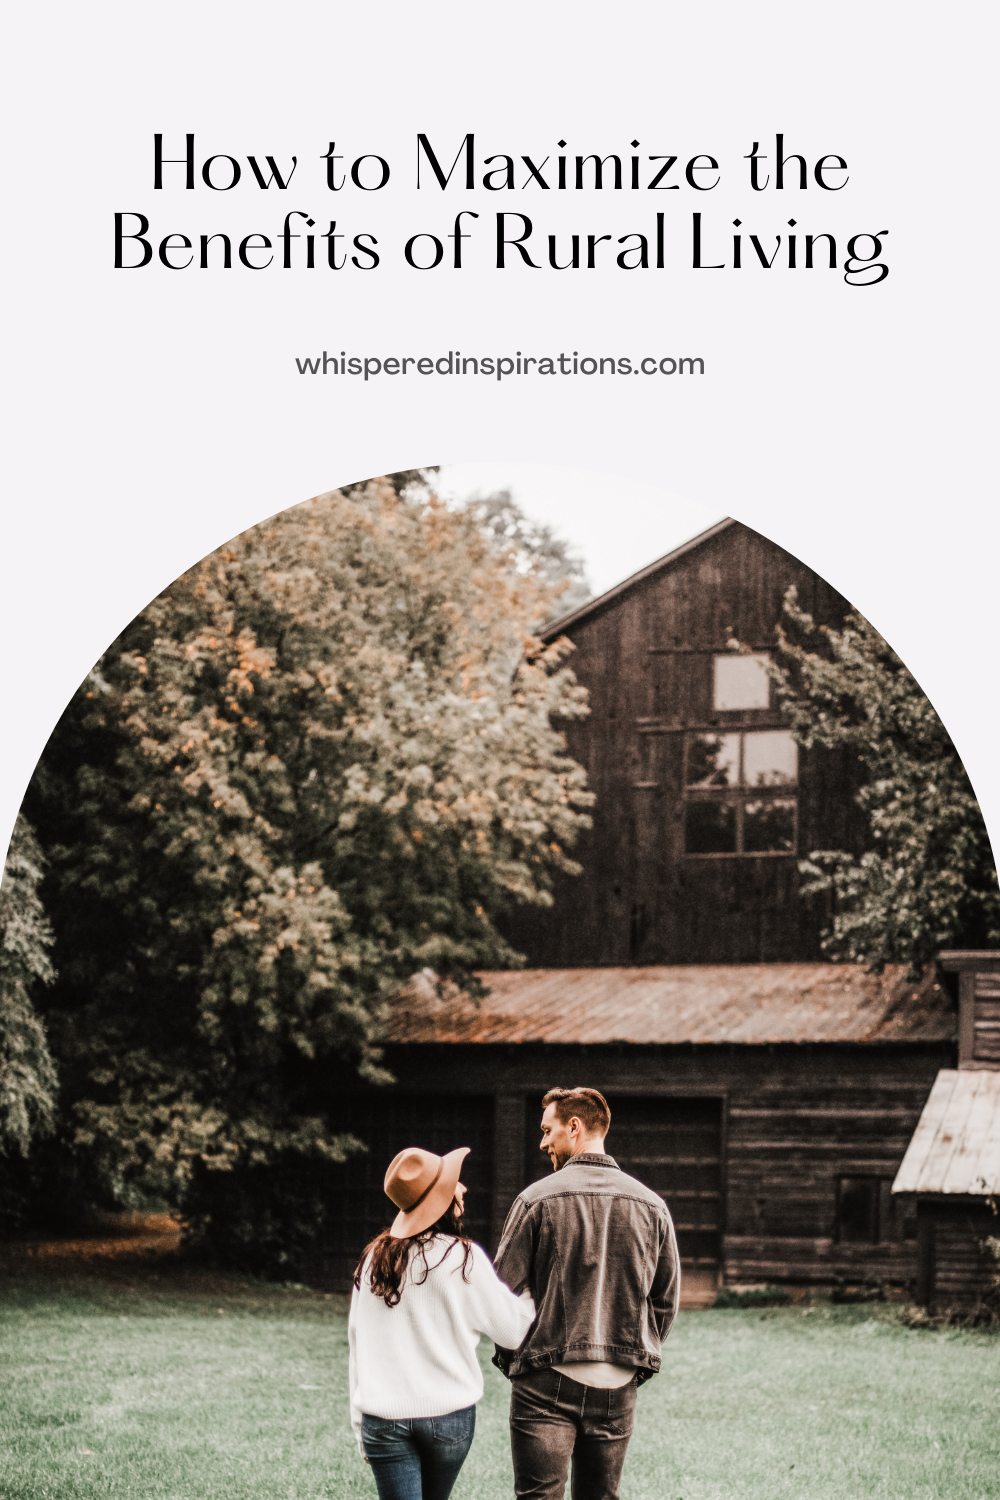 A couple walking towards their rural farmhouse. This article covers how to maximize the benefits of rural living.